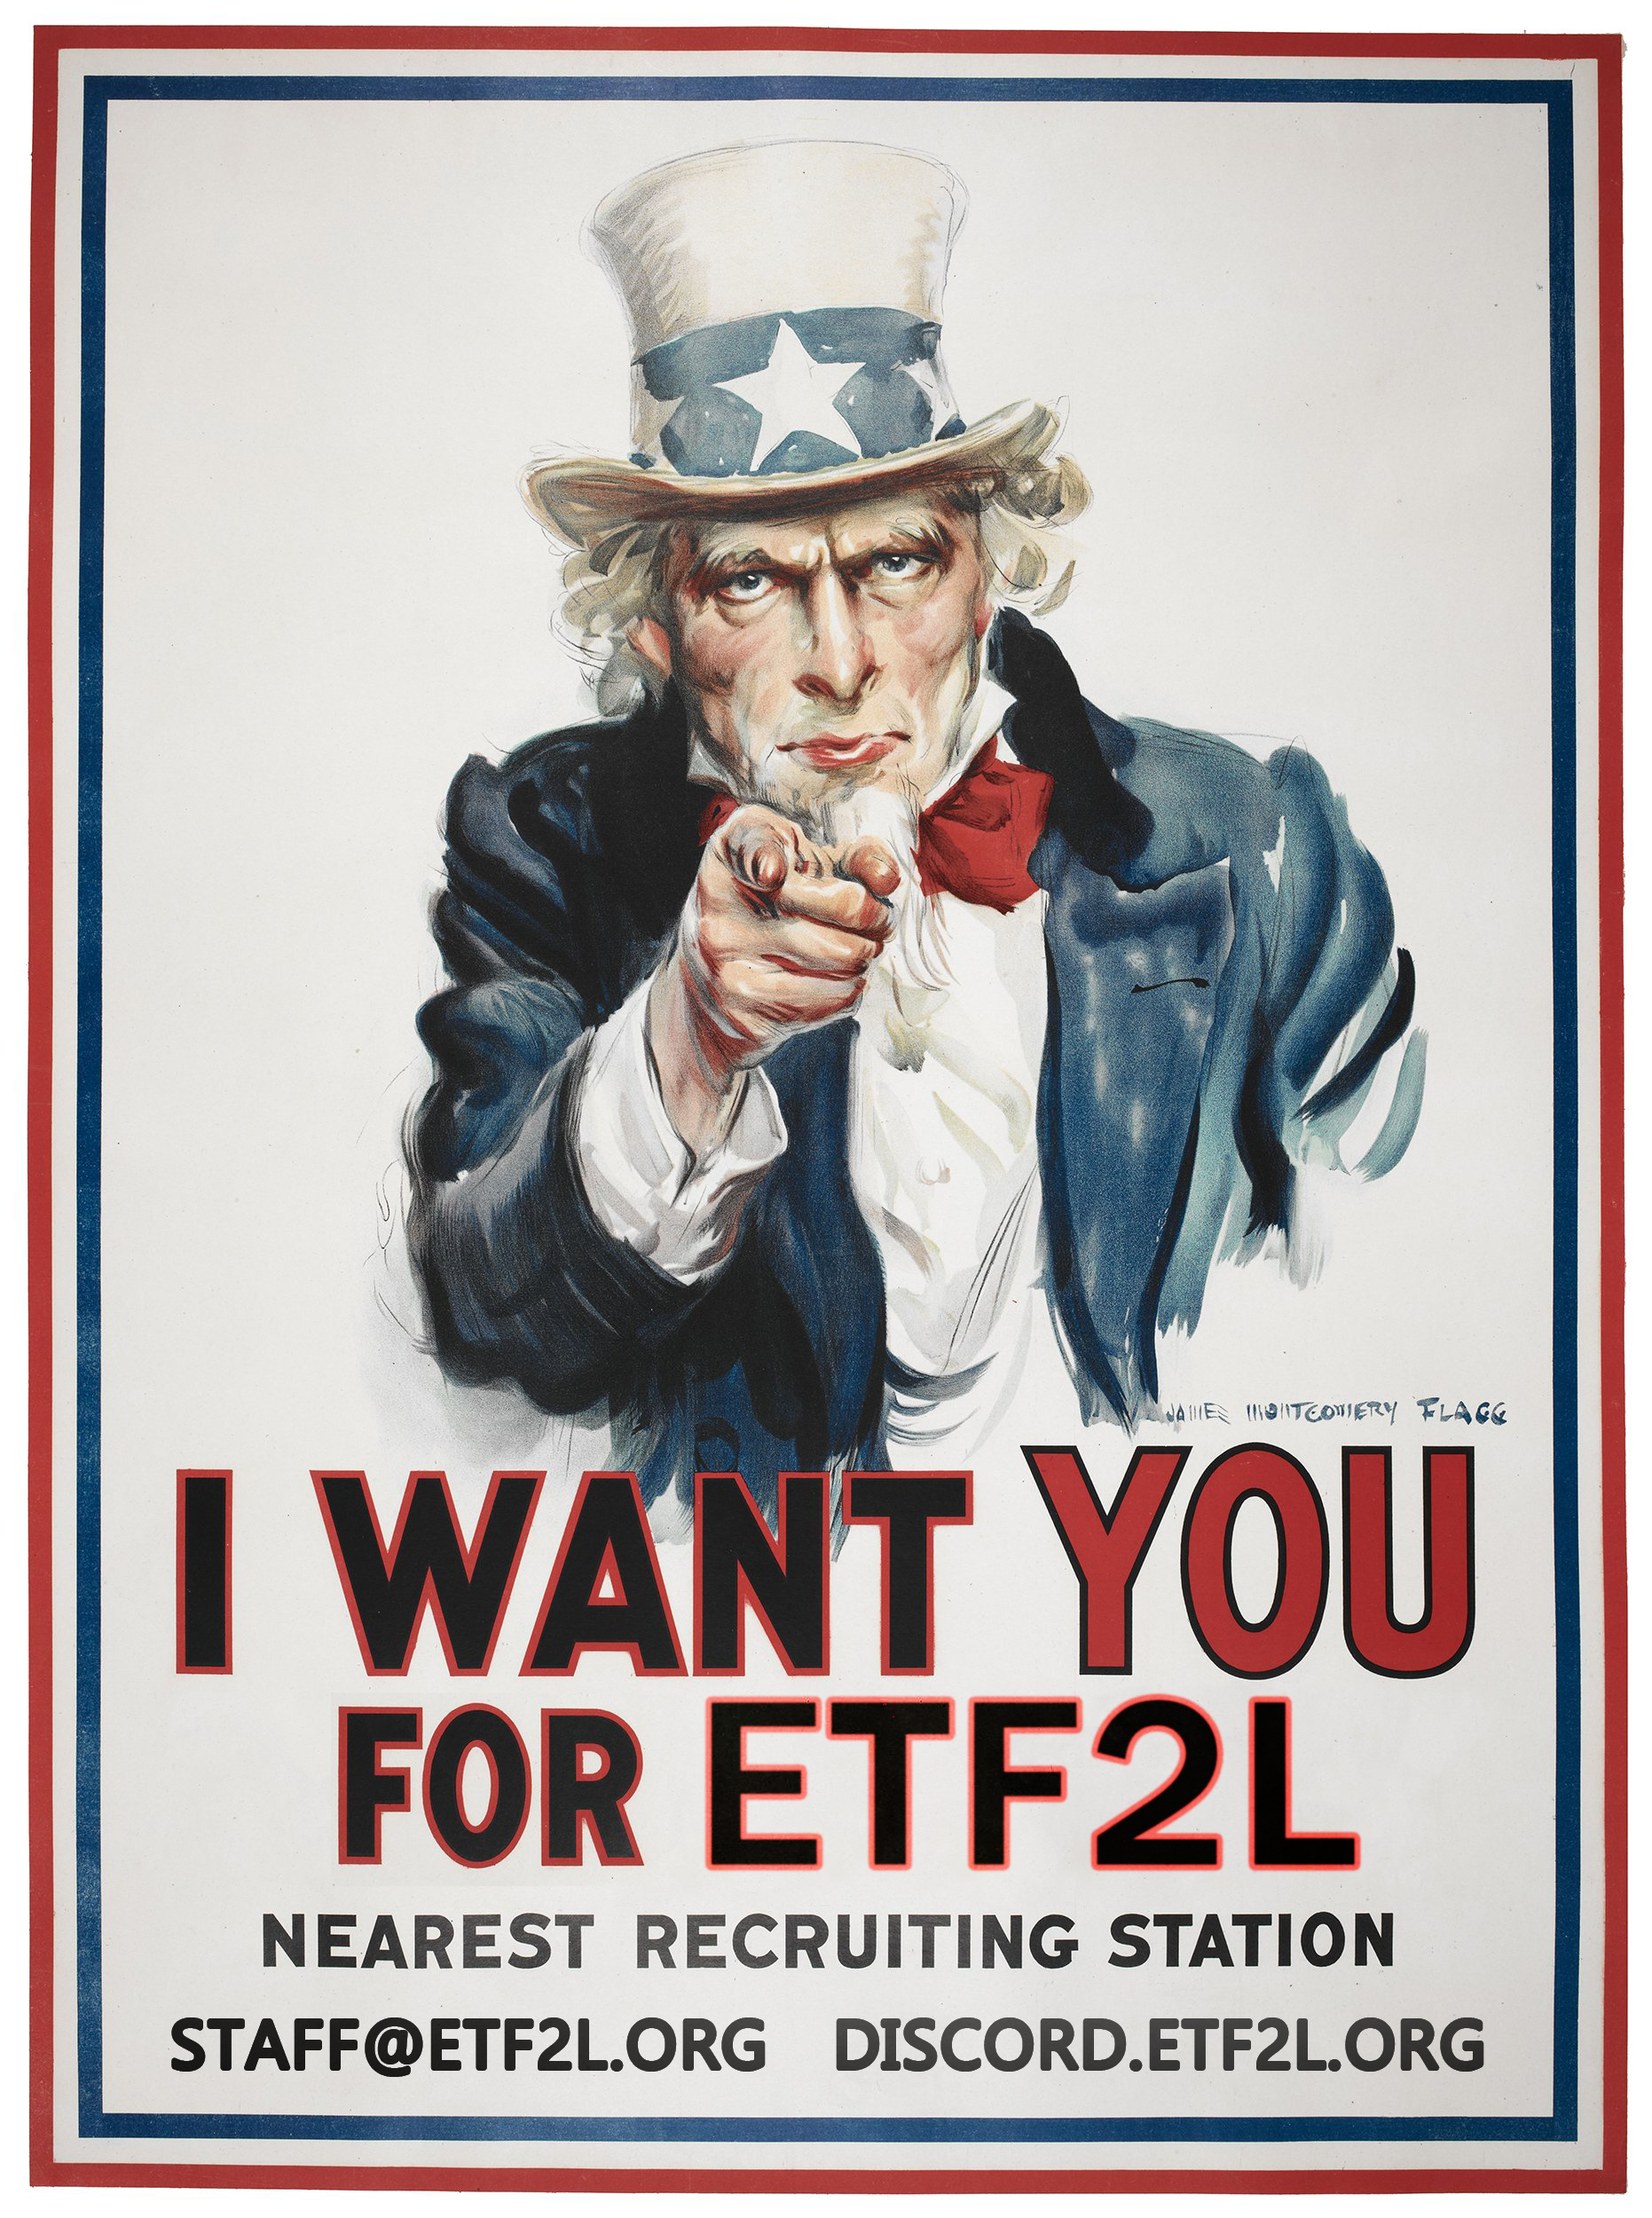 I want YOU for ETF2L Staff – ETF2L is recruiting!